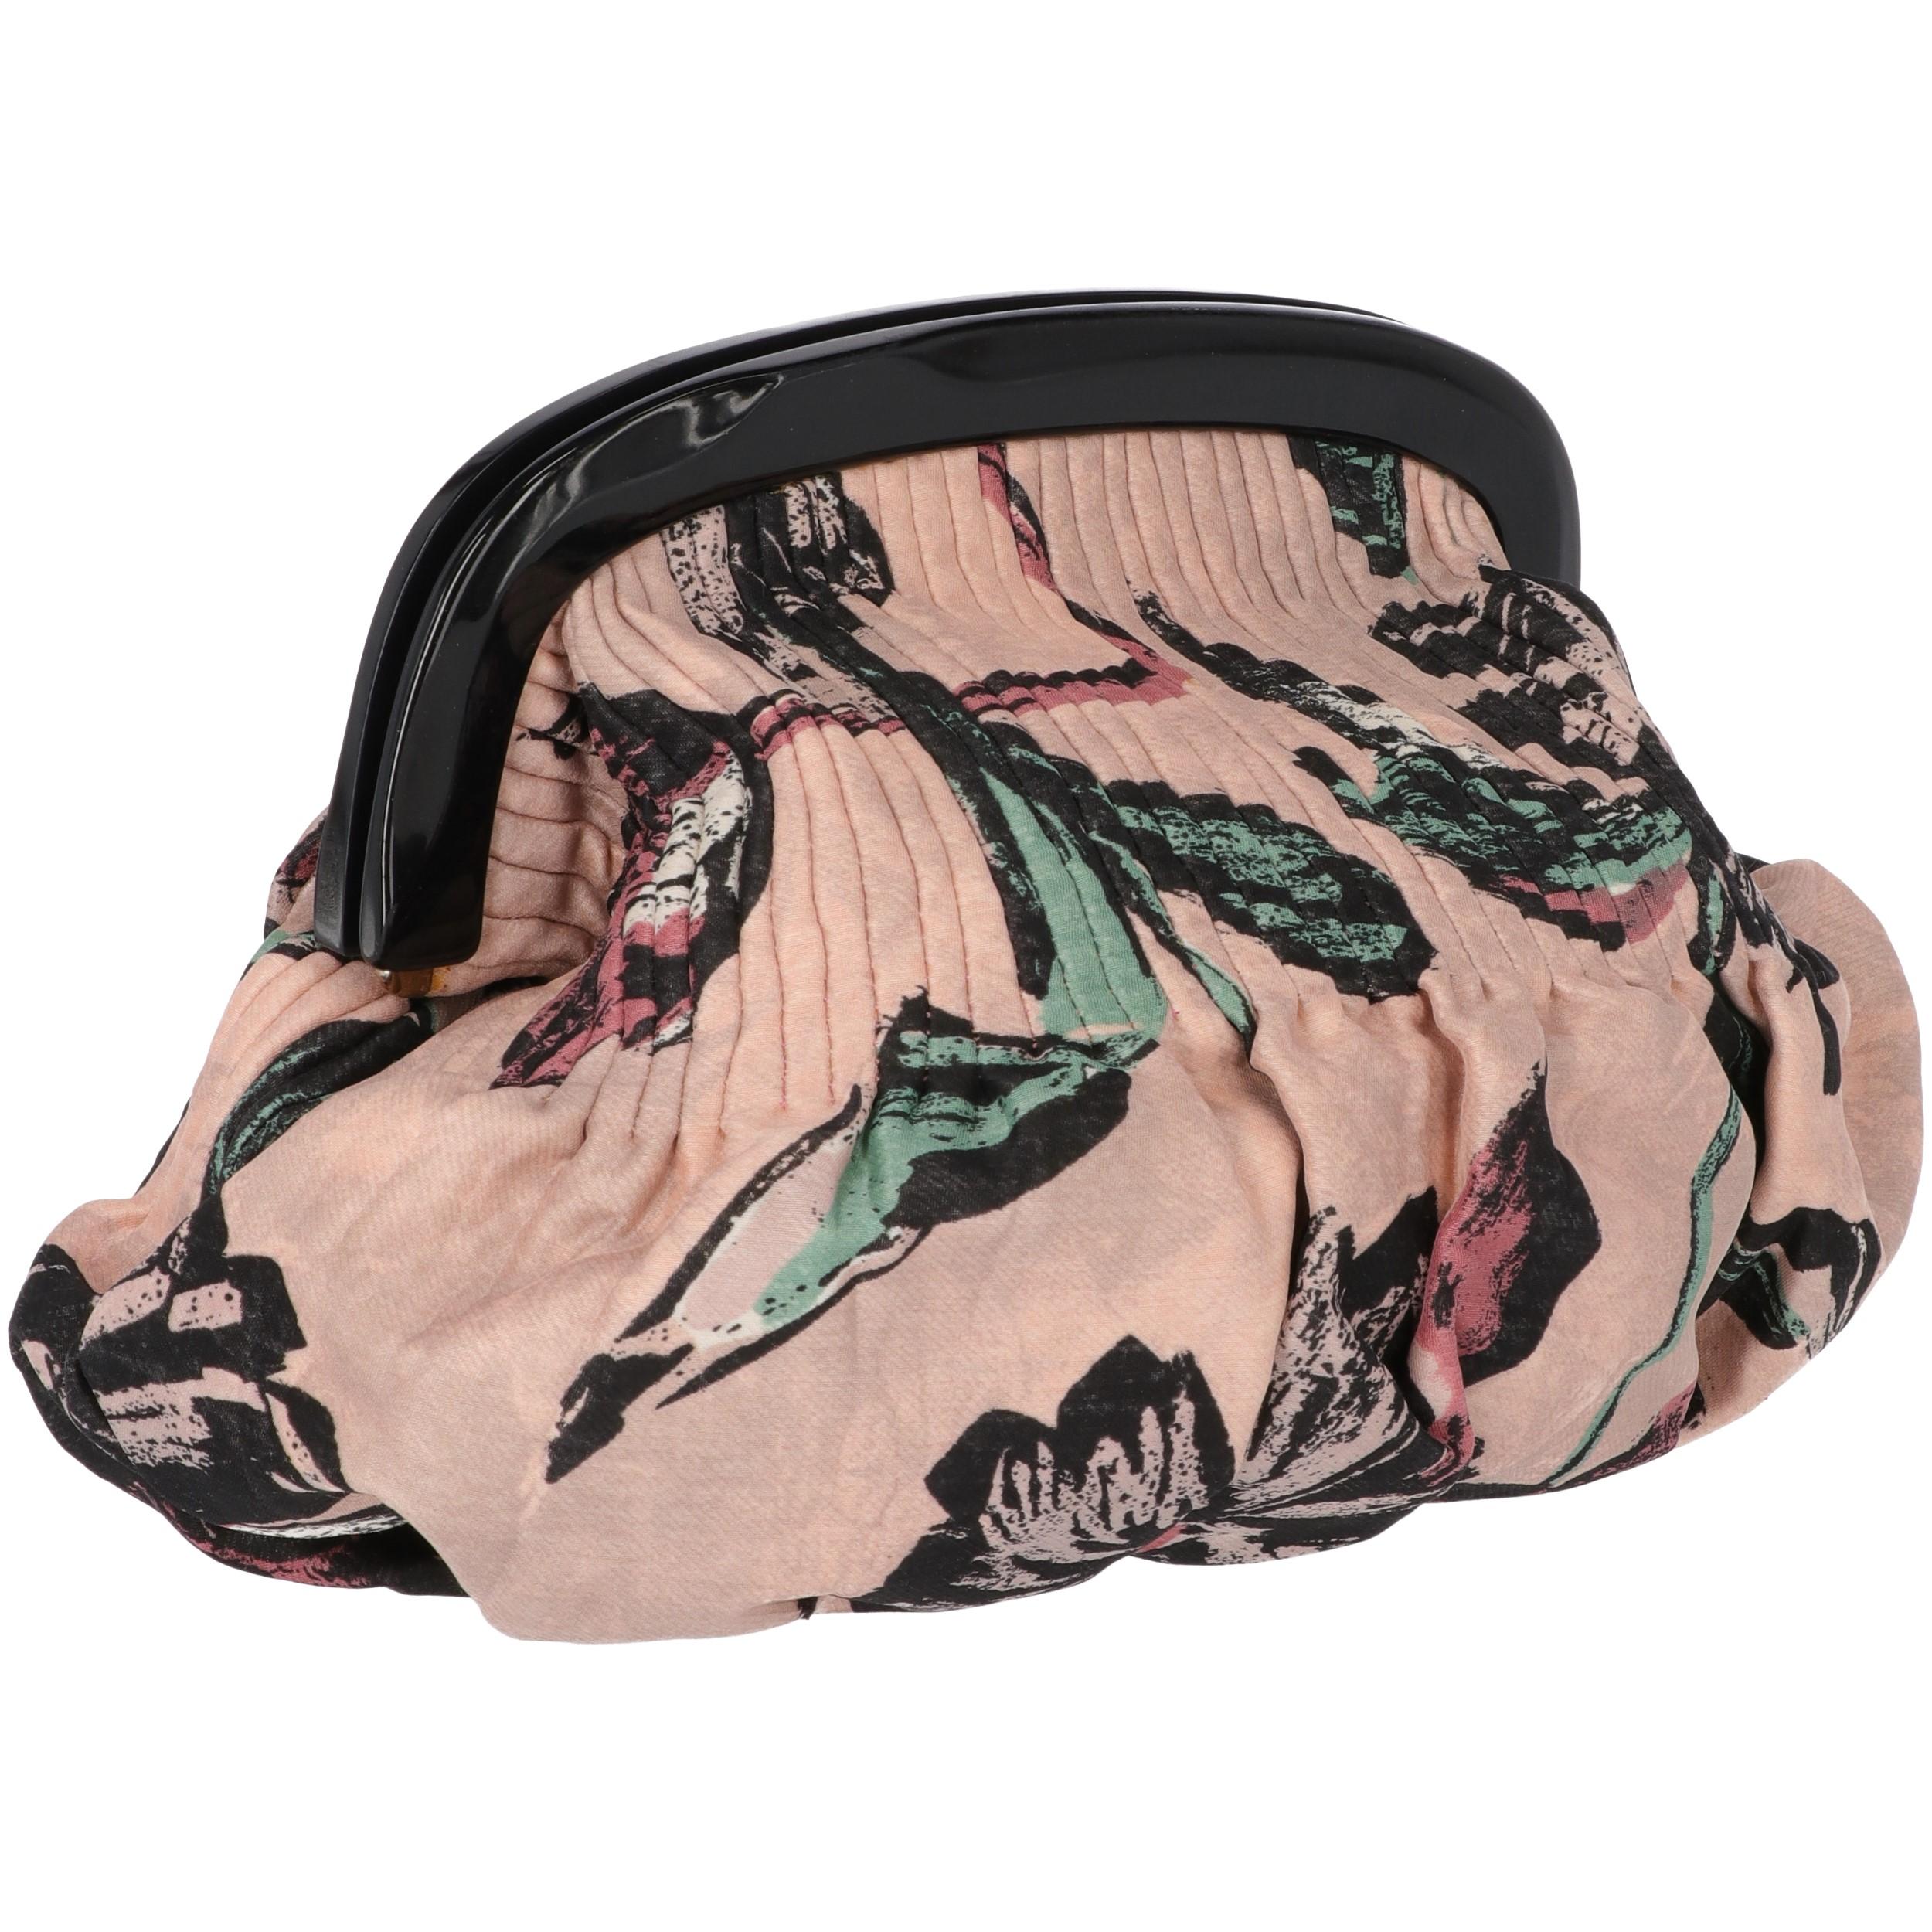 Marni clutch bag pink with floral pattern, decorative stitching, snap closure in black pvc and buckle, gathering at the bottom and beige lining with finished inside pocket.

The product shows slight signs of wear on the metal part inside as shown in